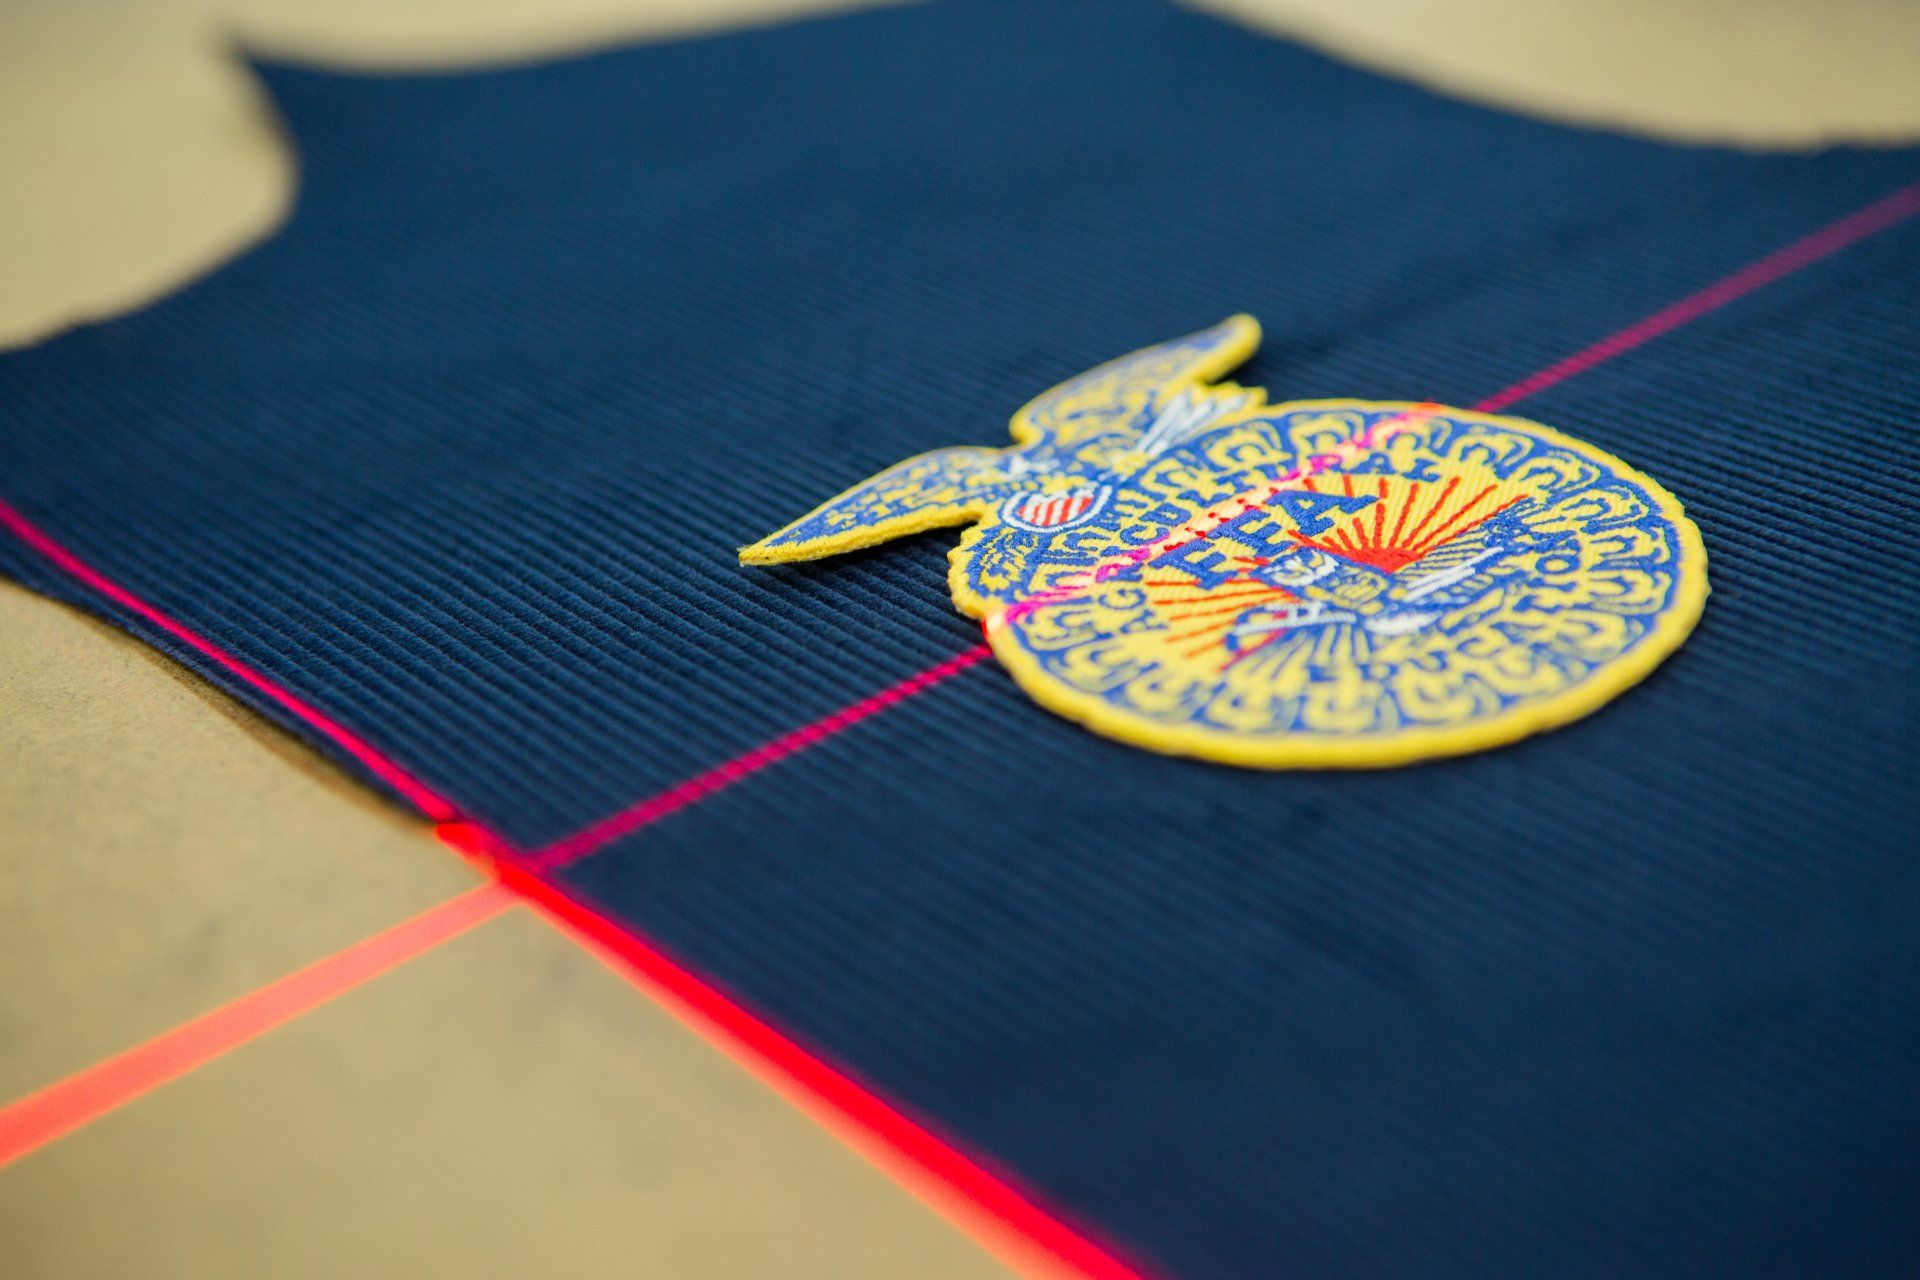 An FFA Jacket being measured out with laser lines.